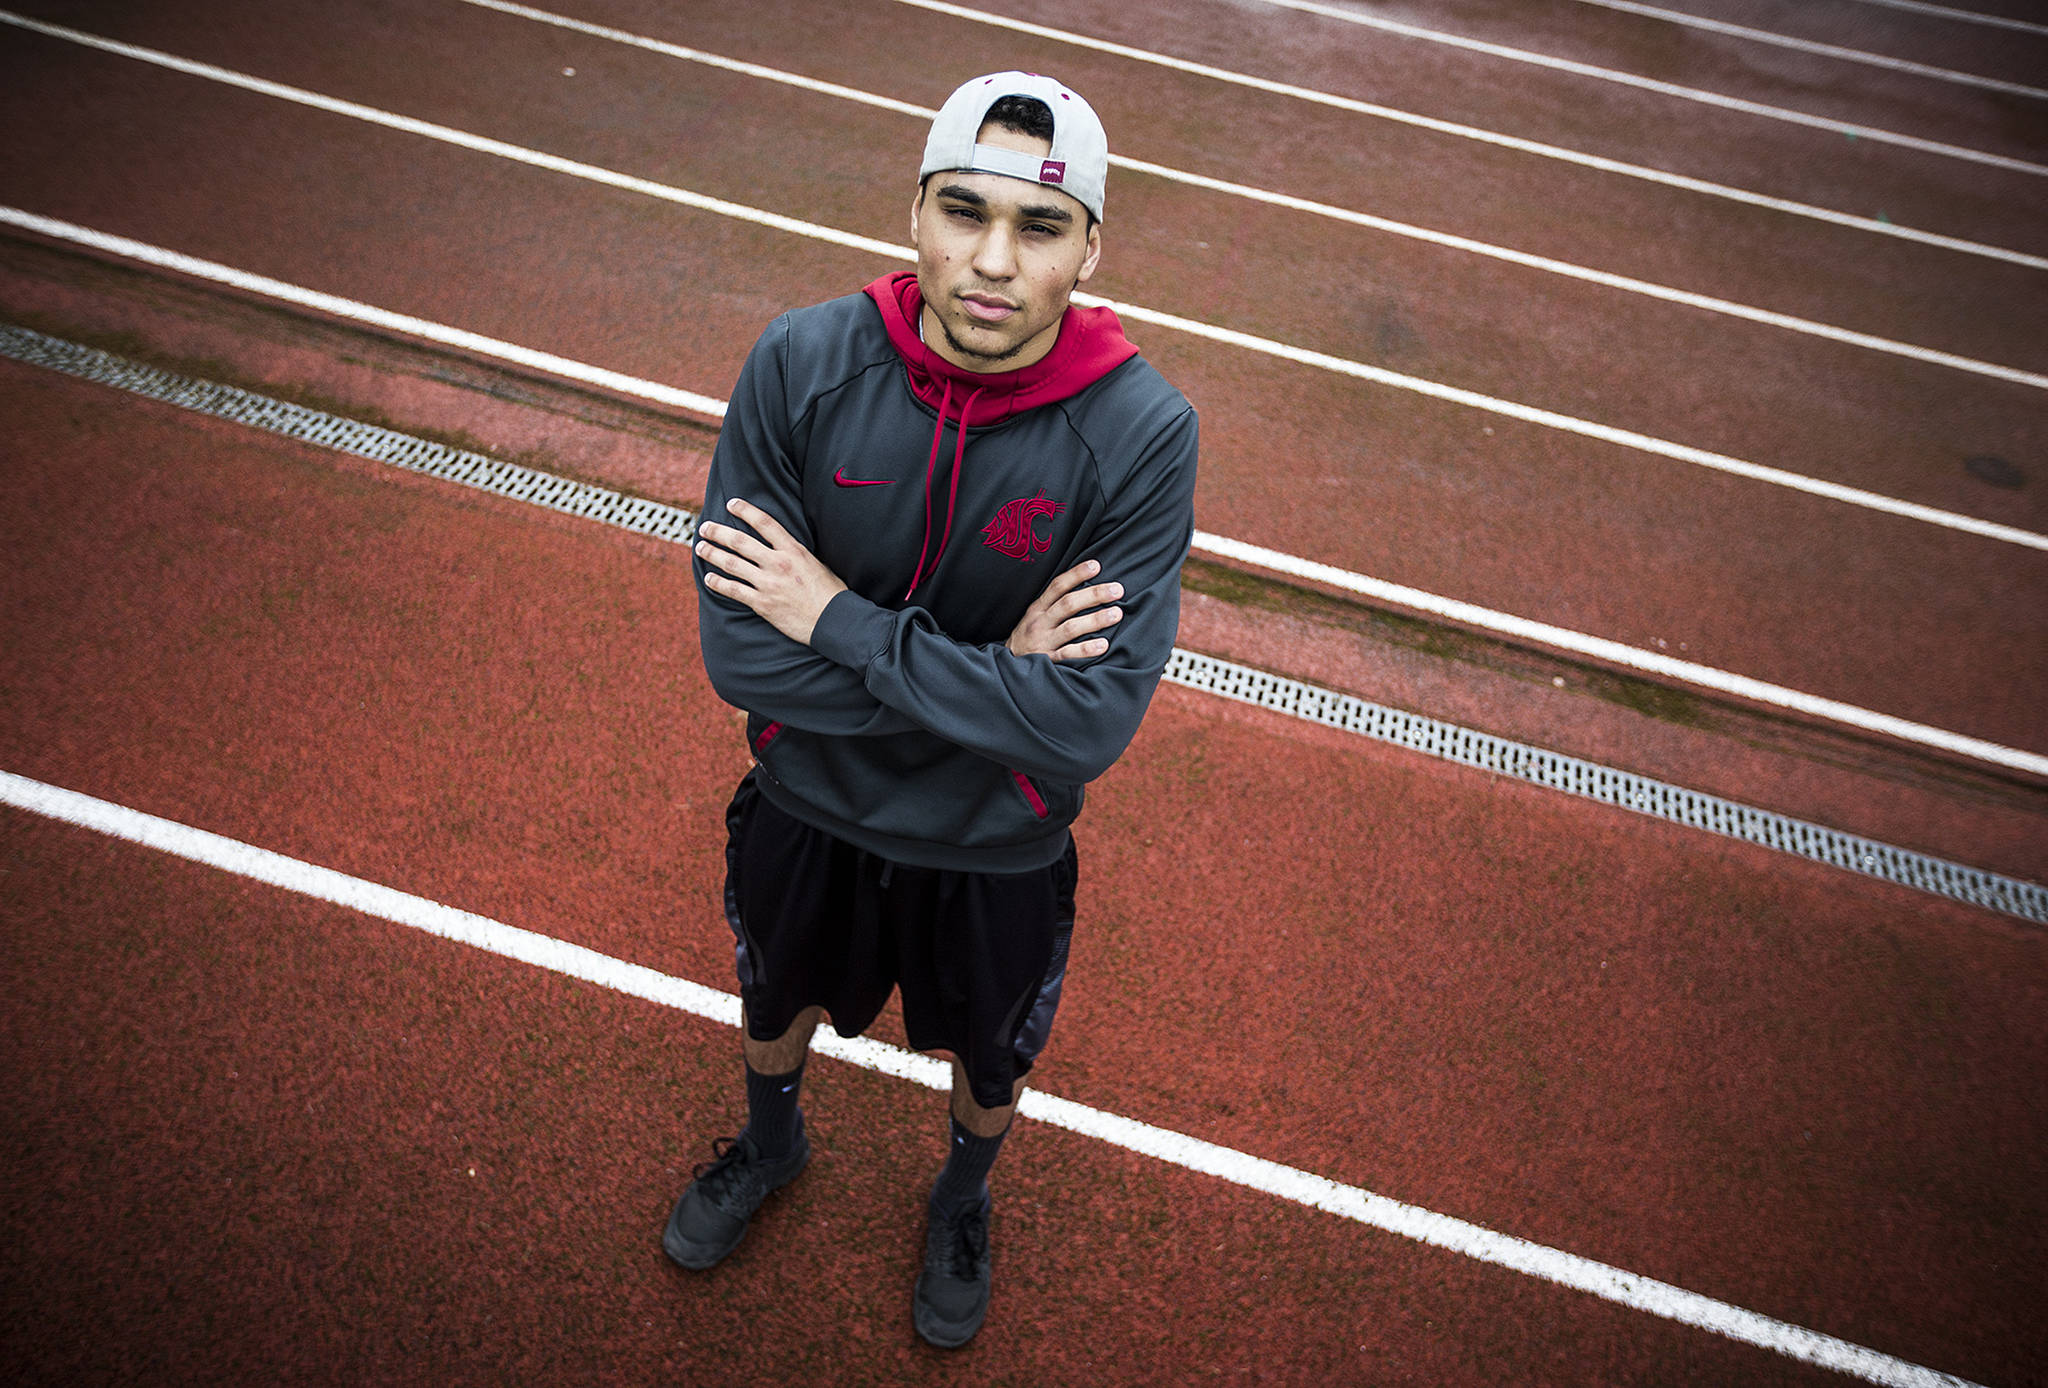 King’s senior Caleb Perry is the reigning Class 1A 100-meter state champion as well as a star running back on the football team. (Ian Terry / The Herald)